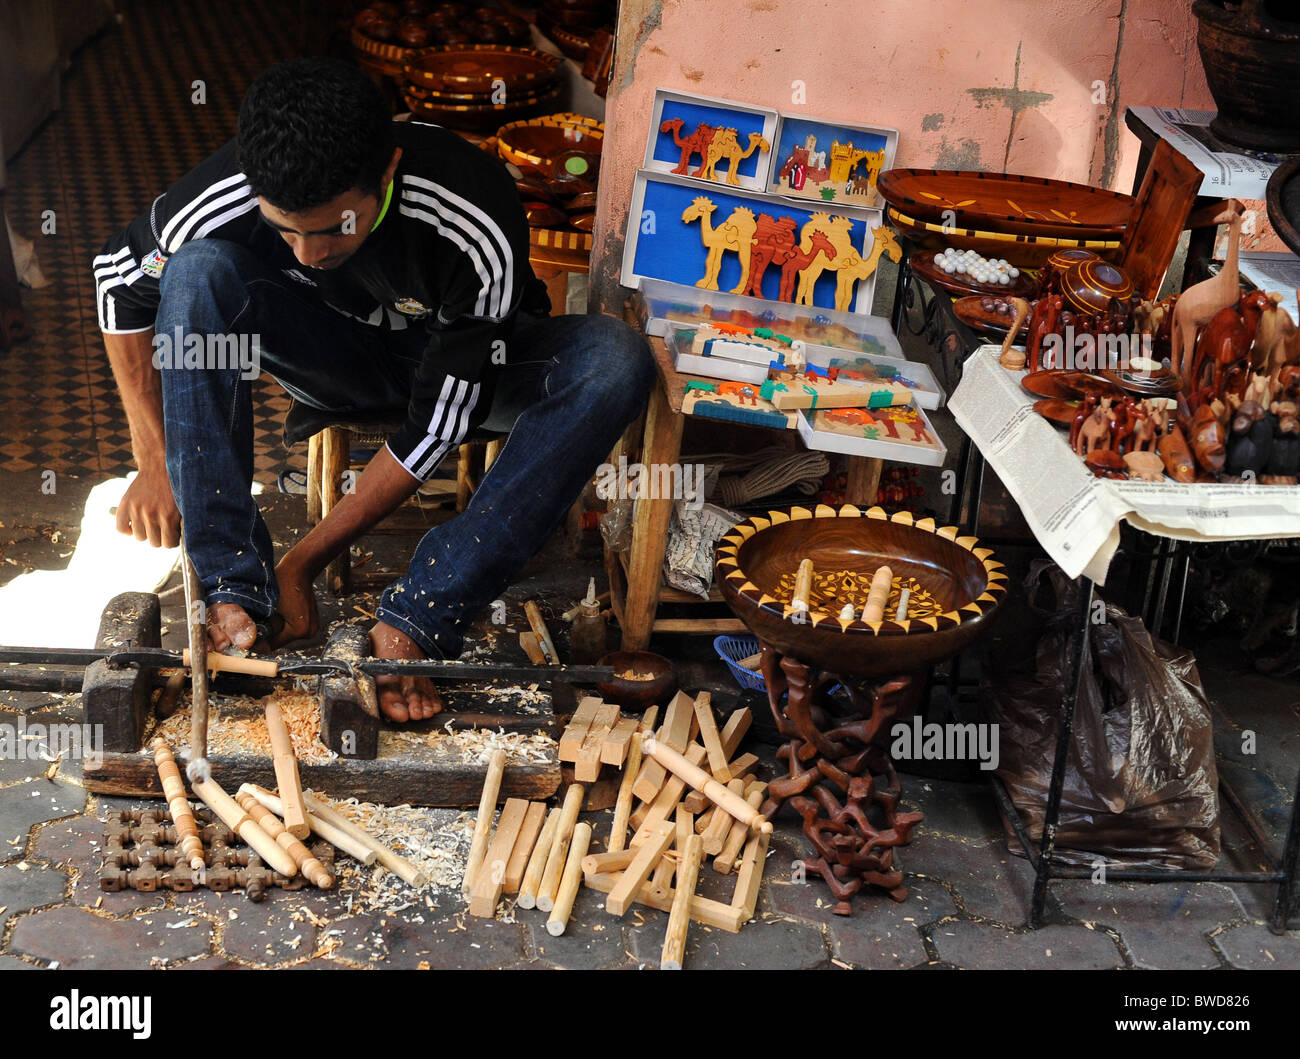 A craftsman carves articles from wood with a lathe using his feet in a souk in Marrakech. Stock Photo